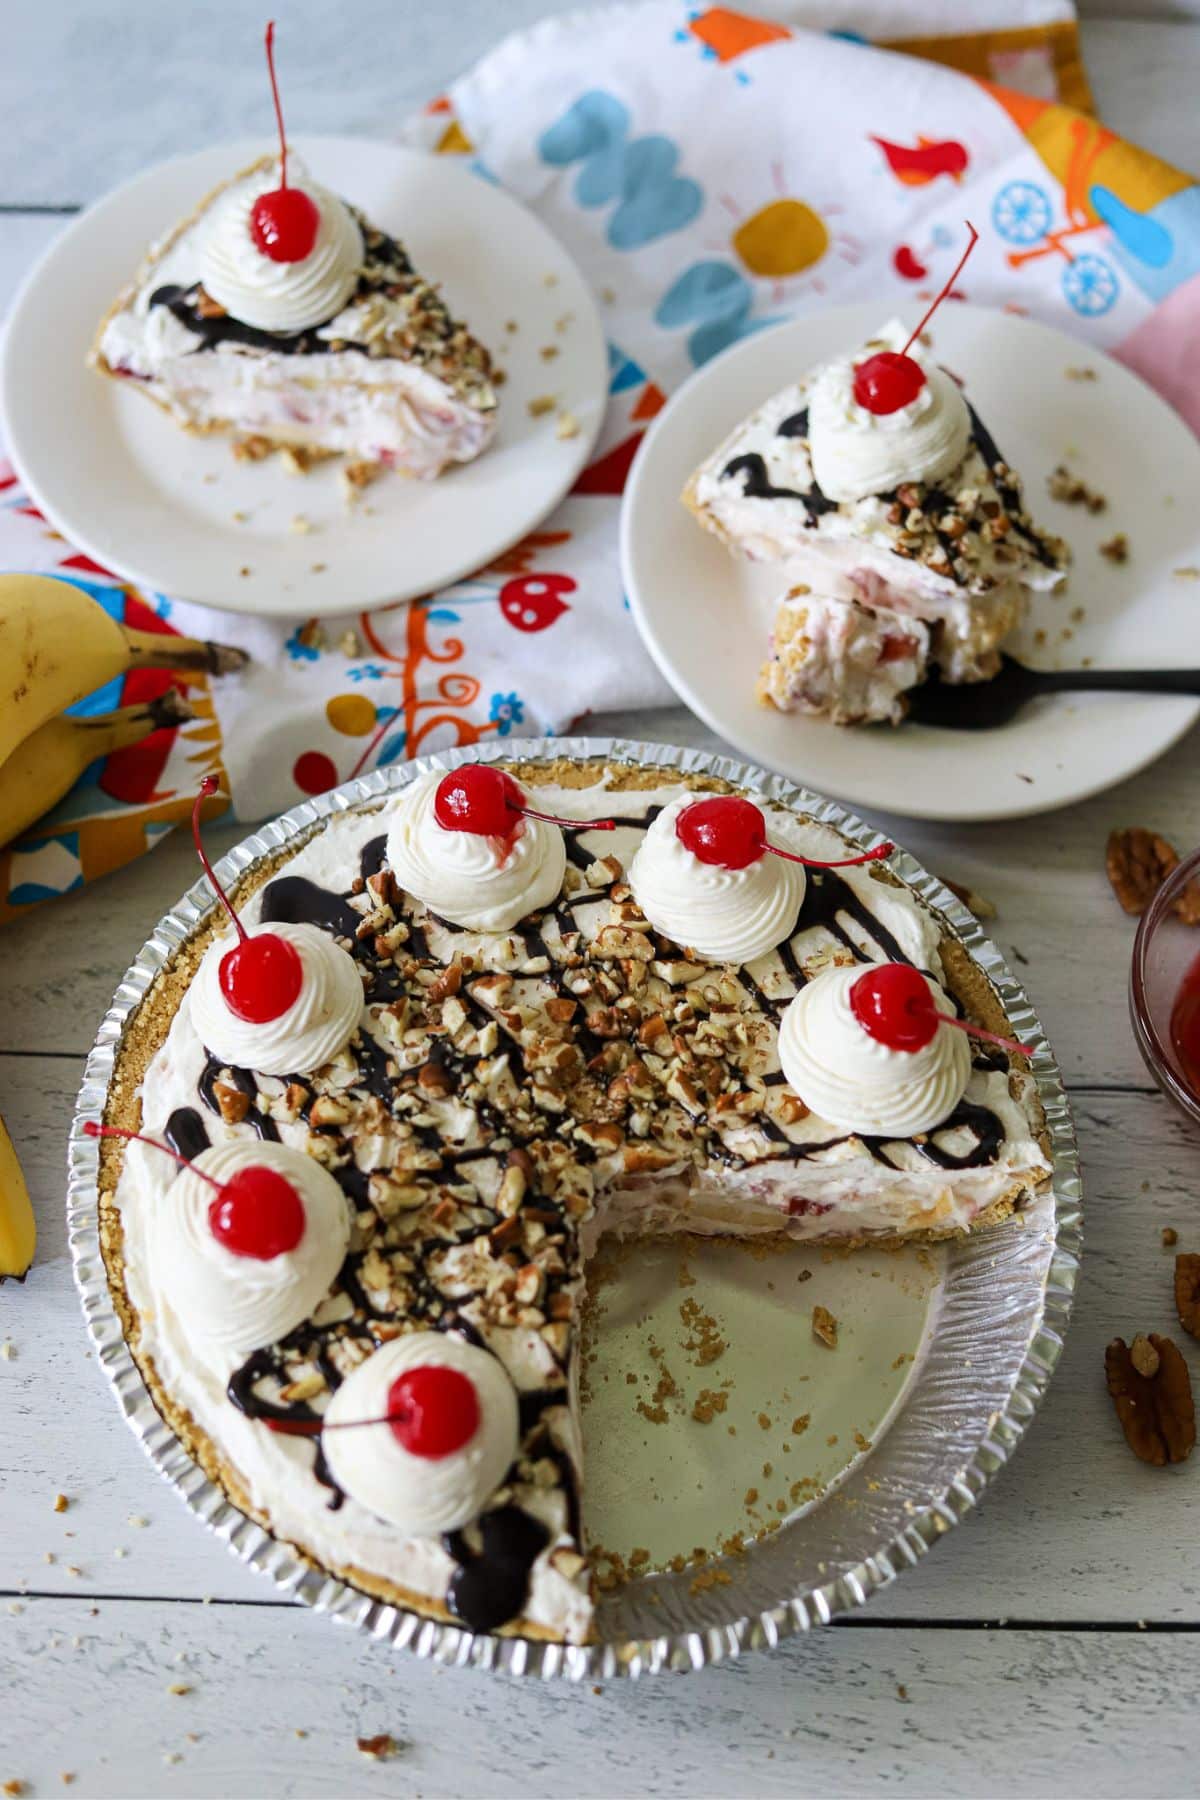 a banana split pie with two slices cut and on plates